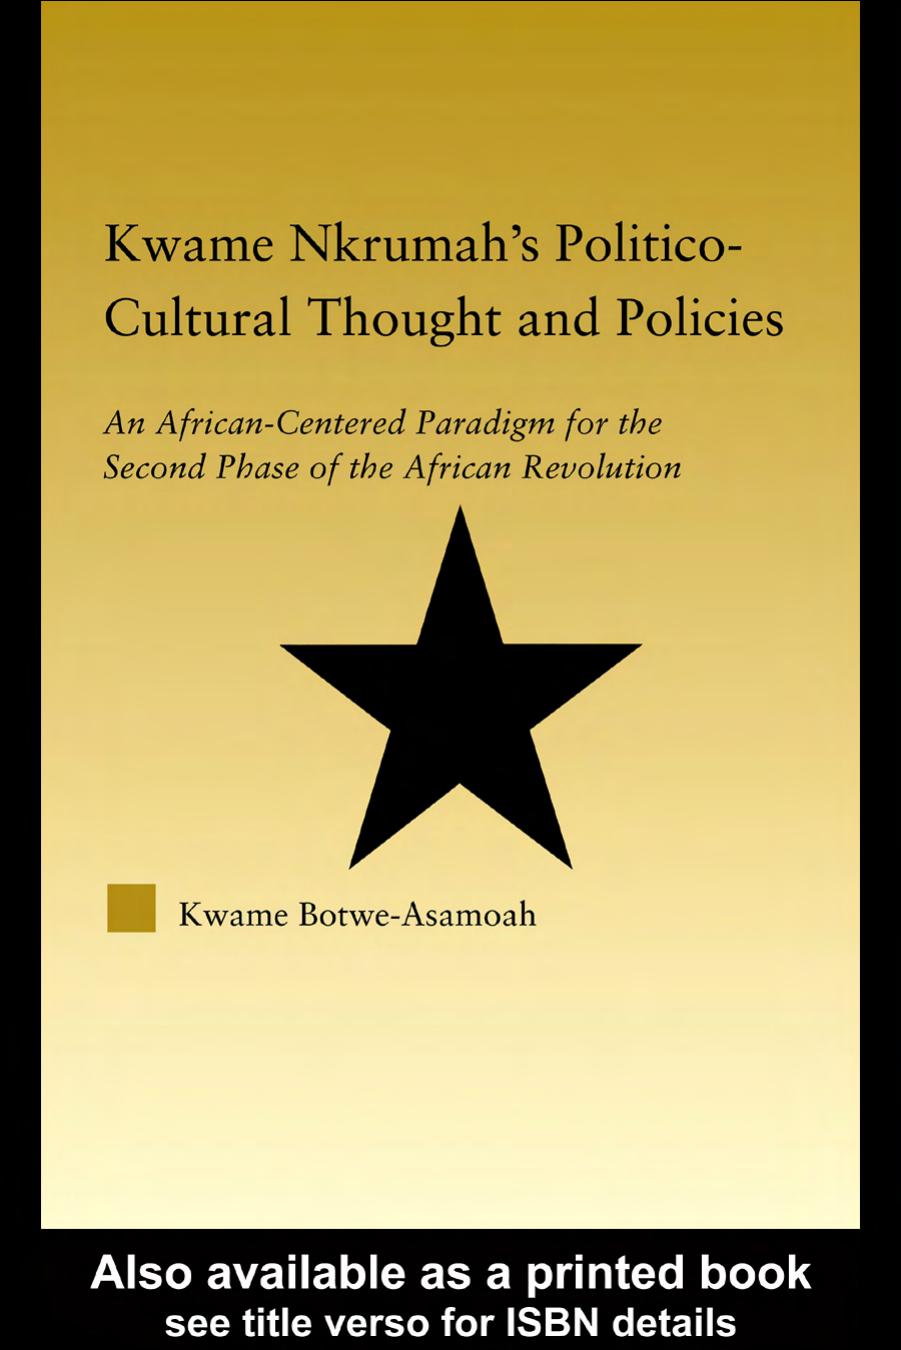 KWAME NKRUMAH’S POLITICO-CULTURAL THOUGHT AND POLICIES